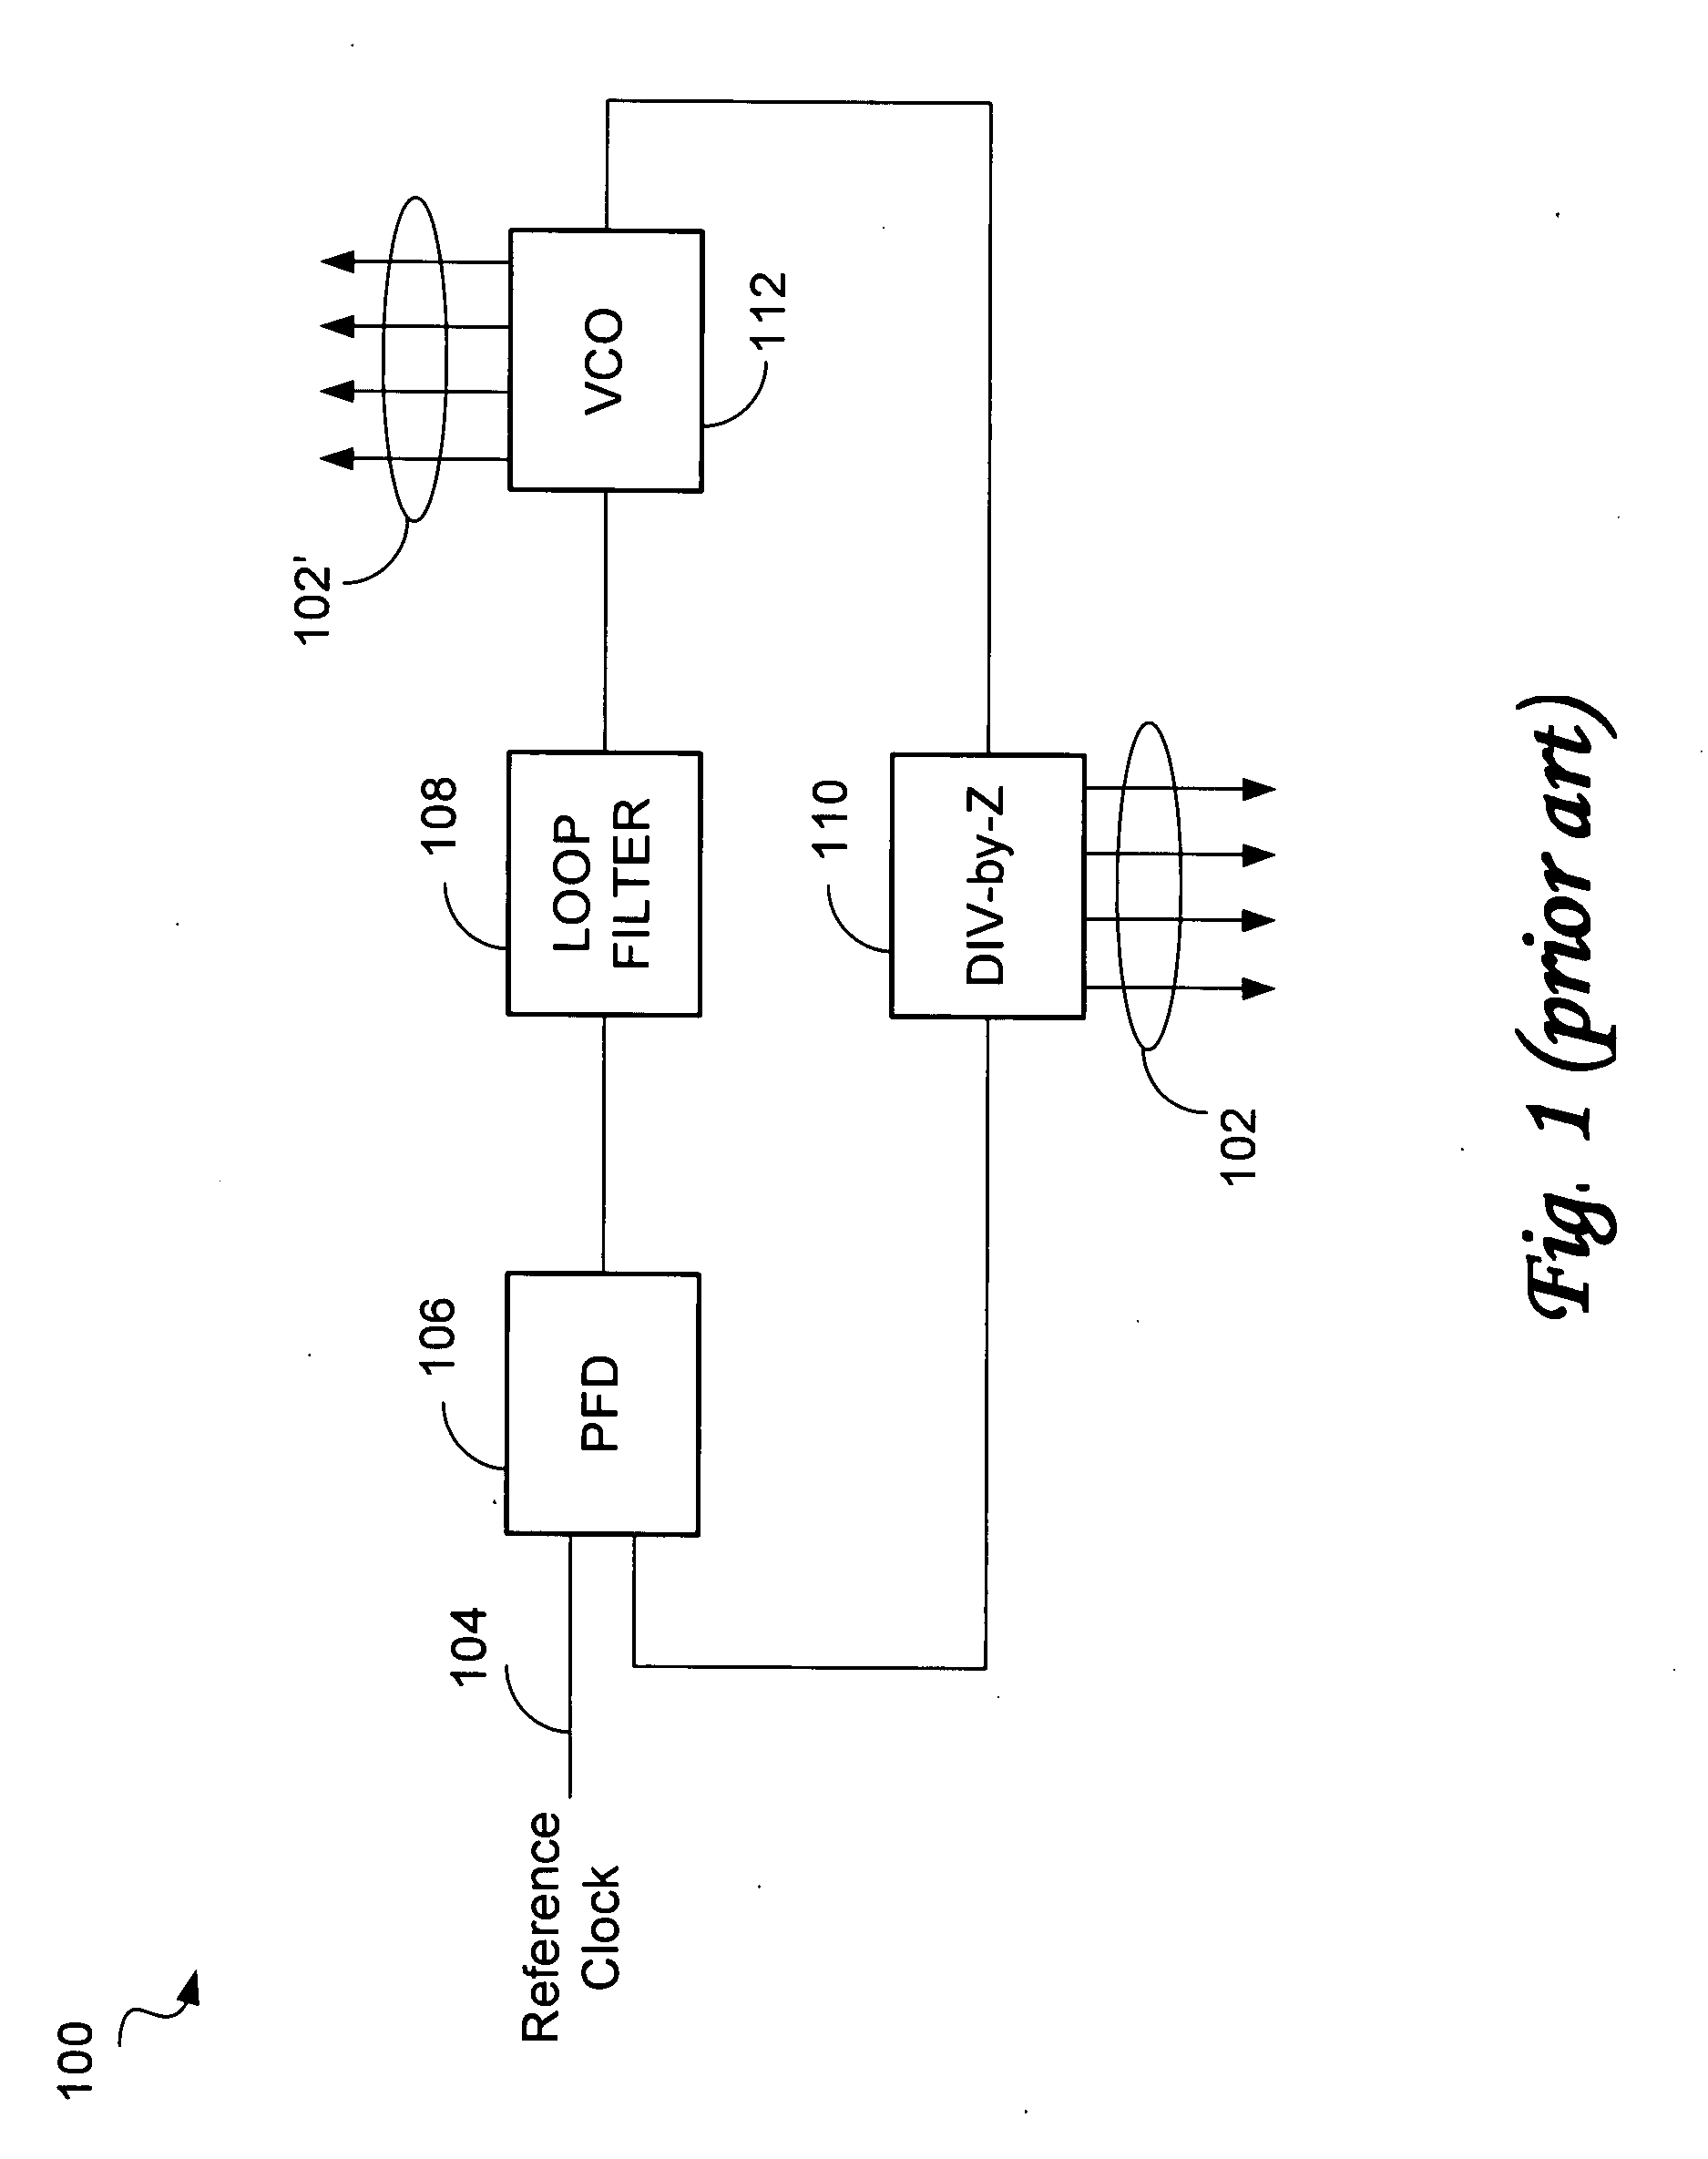 Voltage controlled oscillator (VCO) with a wide tuning range and substantially constant voltage swing over the tuning range